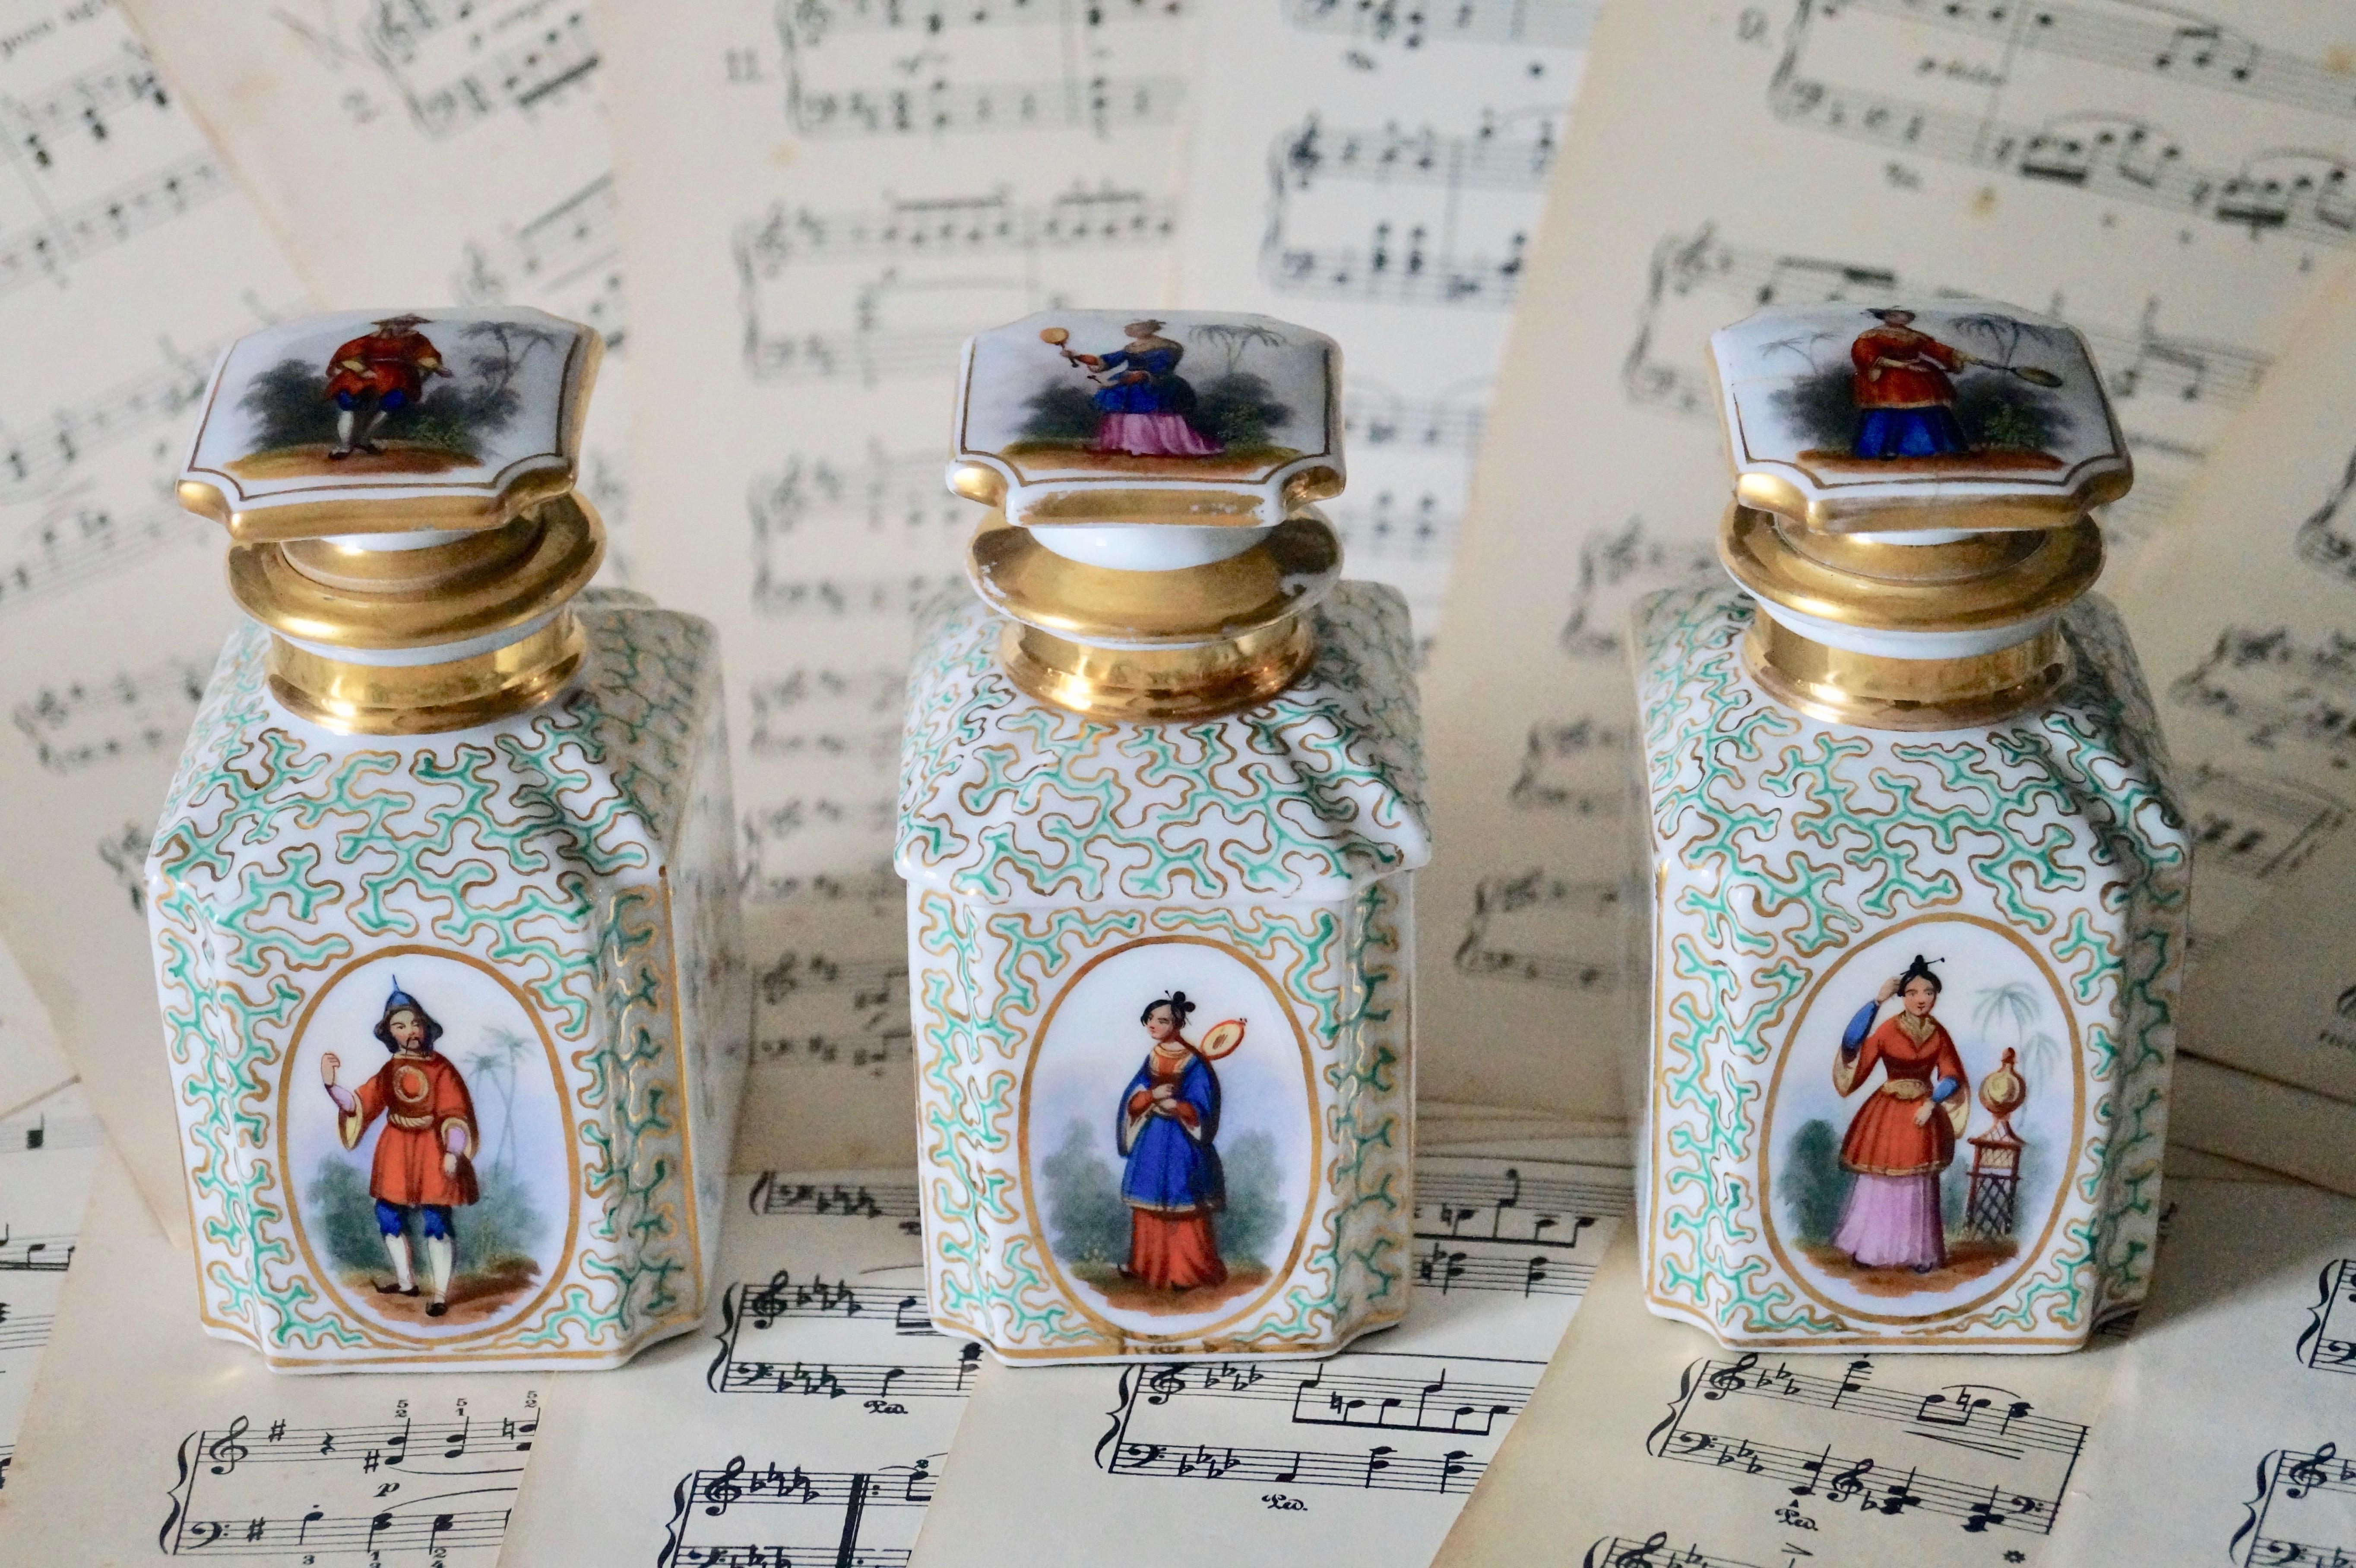 Amazing richly decorated Old Paris Porcelain teacaddies with Chinoiserie paintings

Each Lid is handpainted with a chinoiserie person, a lady with fan or a chinaman. There are two tea caddy lid, the other is a tea caddy with a different kind of